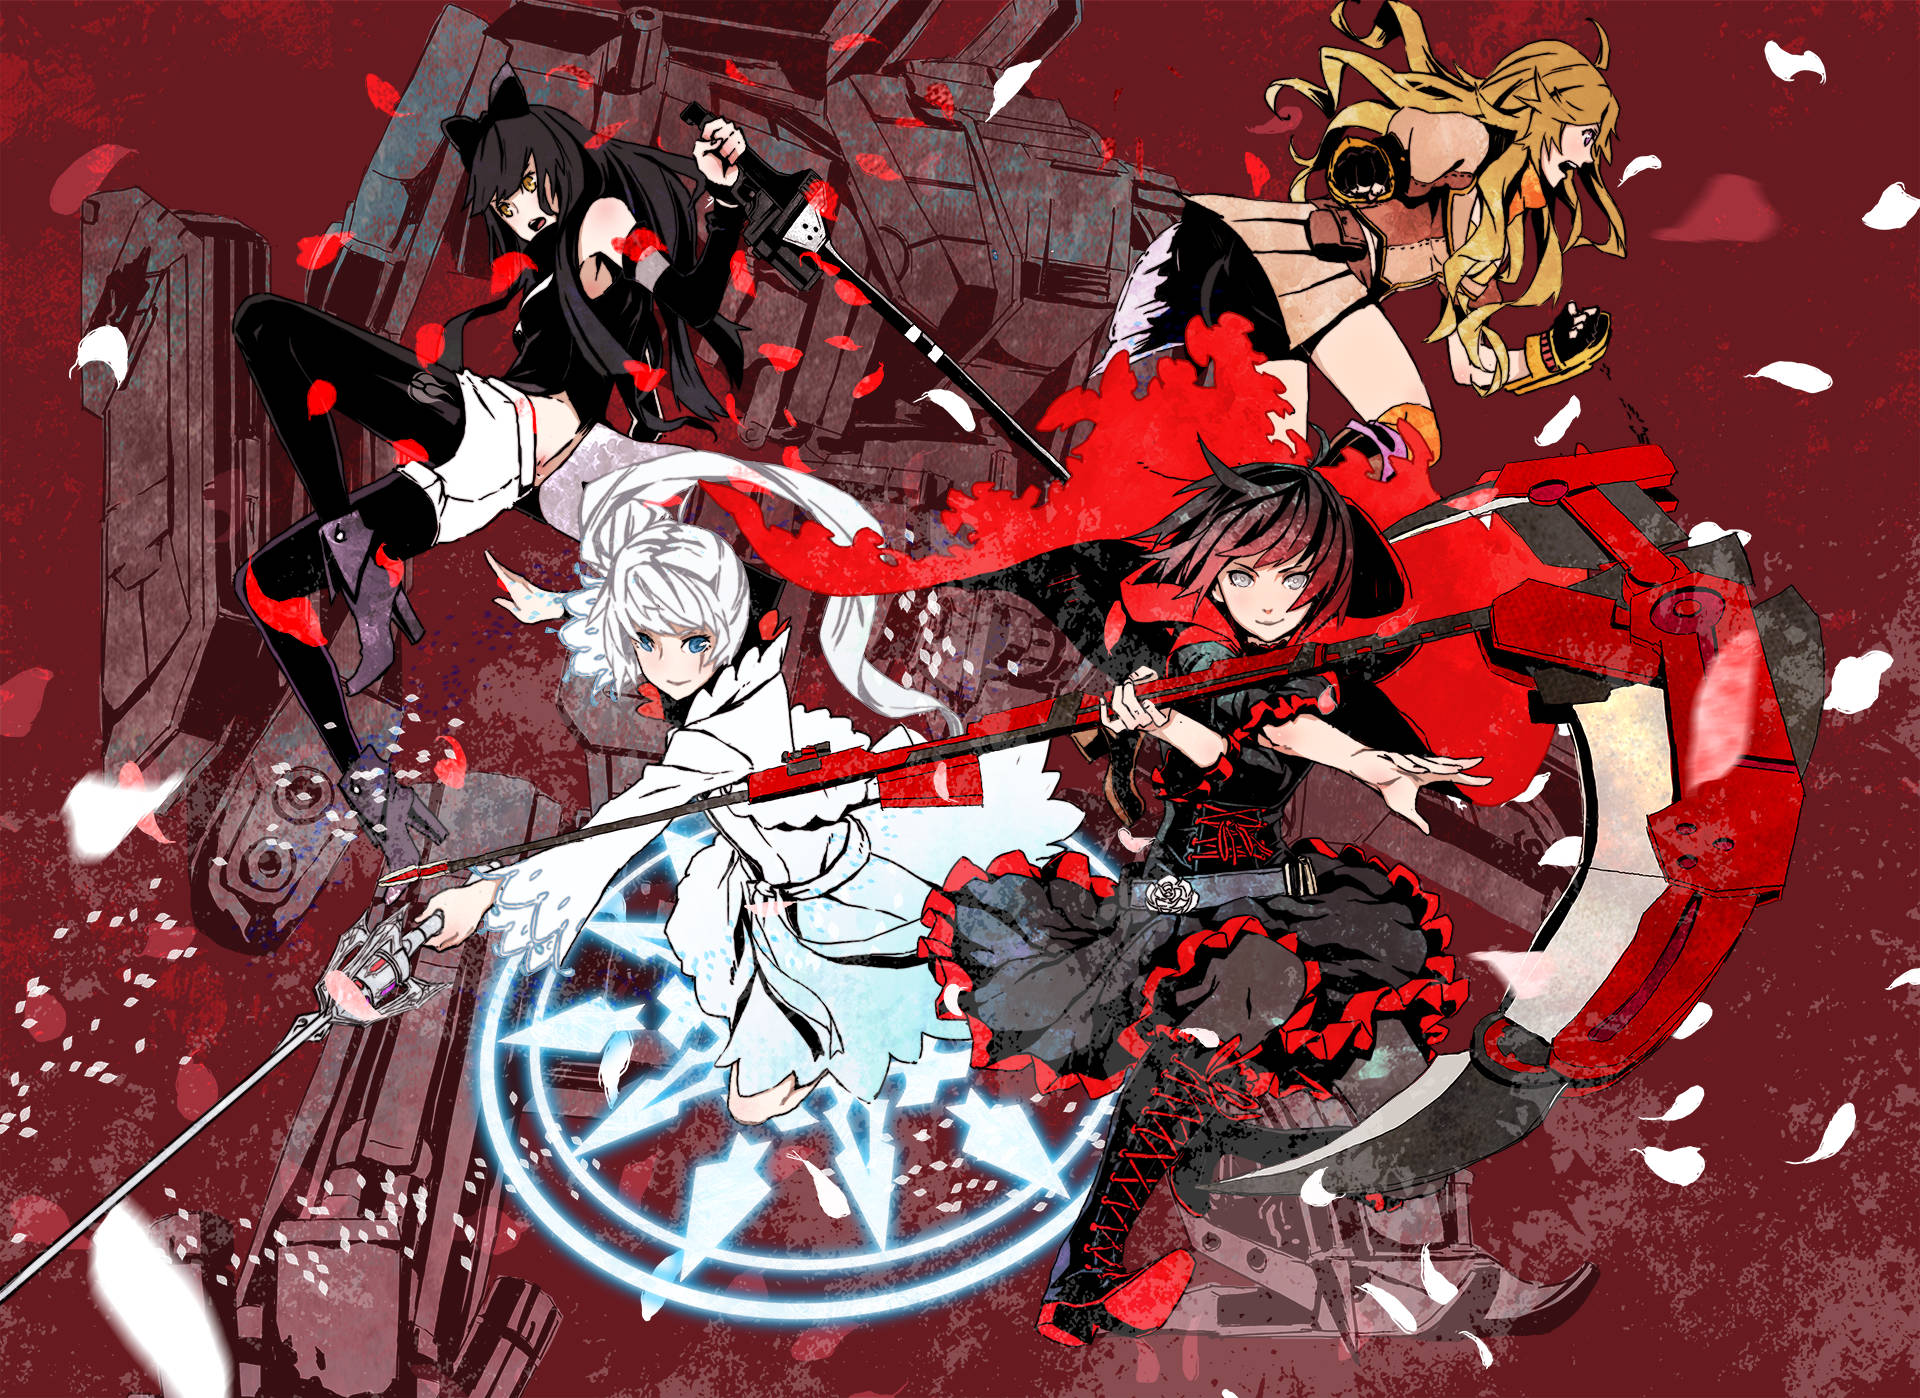 Get ready to be enthralled by the exciting manga series RWBY. Wallpaper